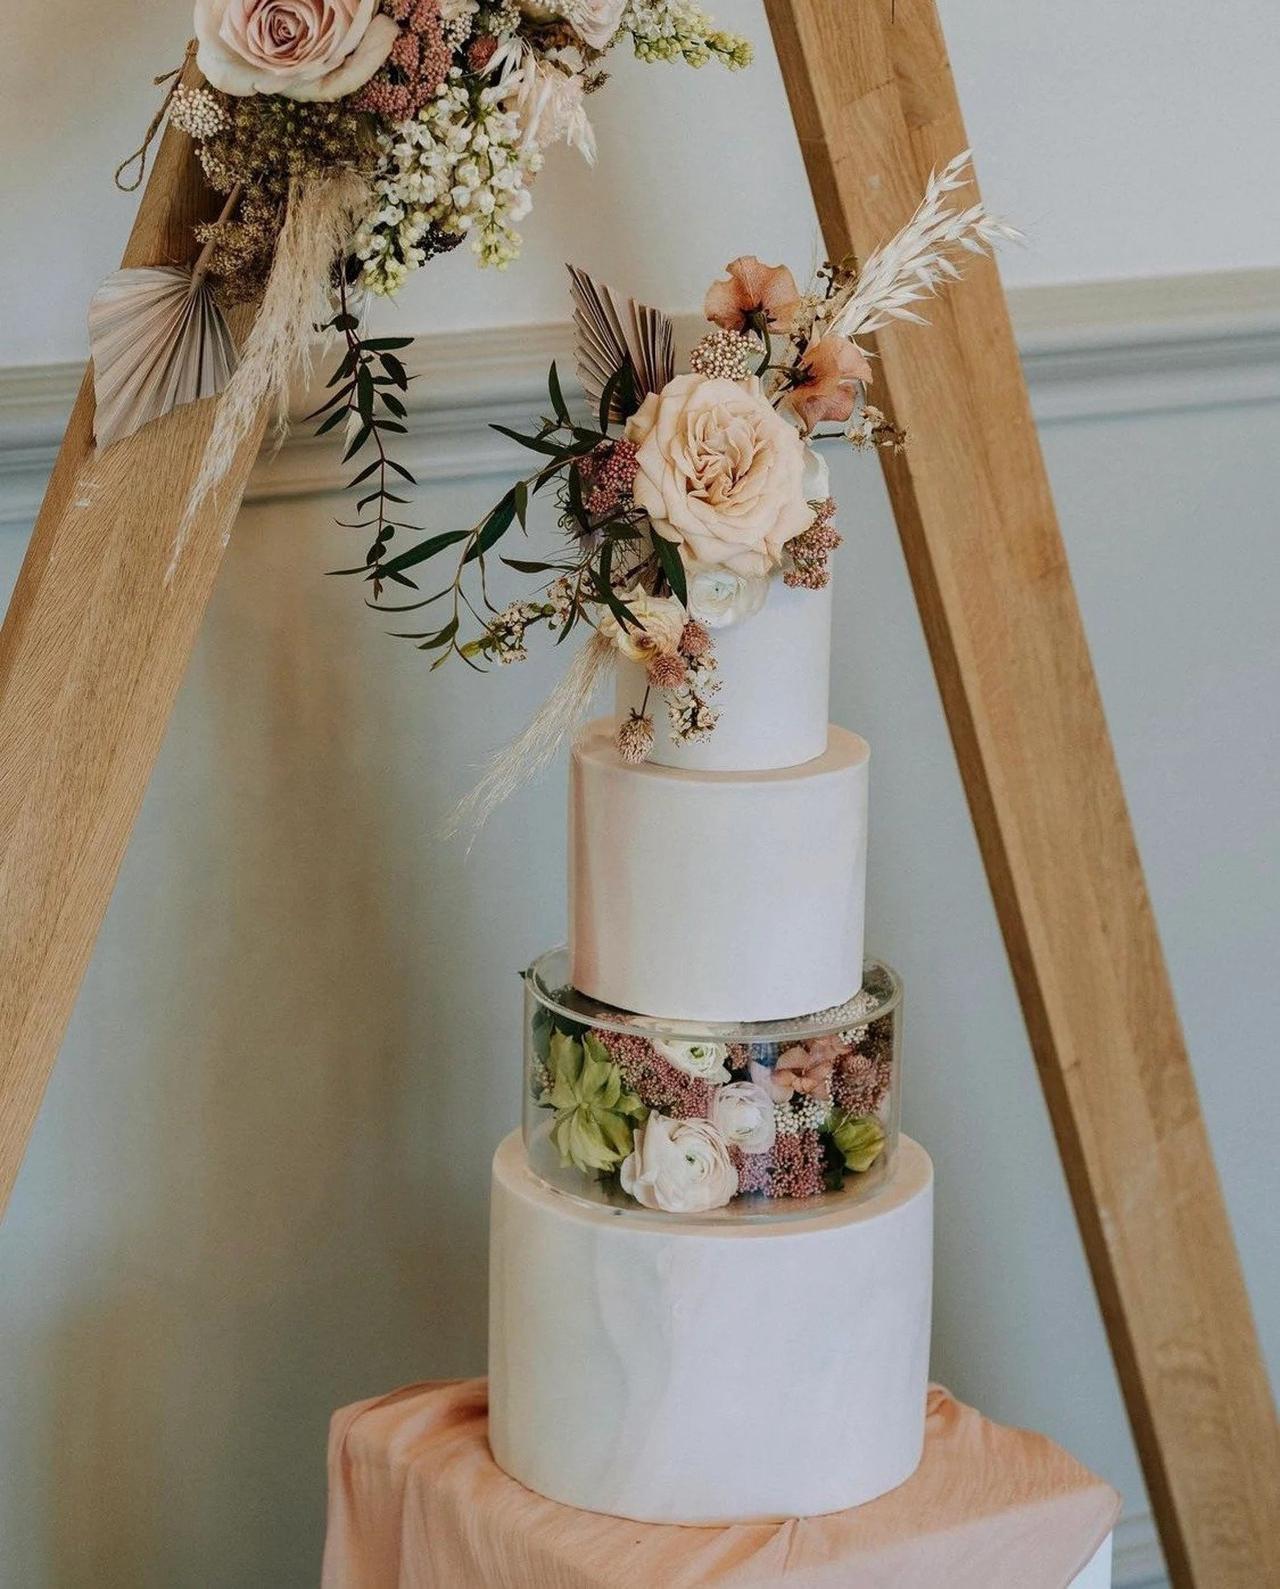 Wedding Cake Stands: 19 Chic Ways to Display Your Wedding Cake - hitched.co.uk - hitched.co.uk